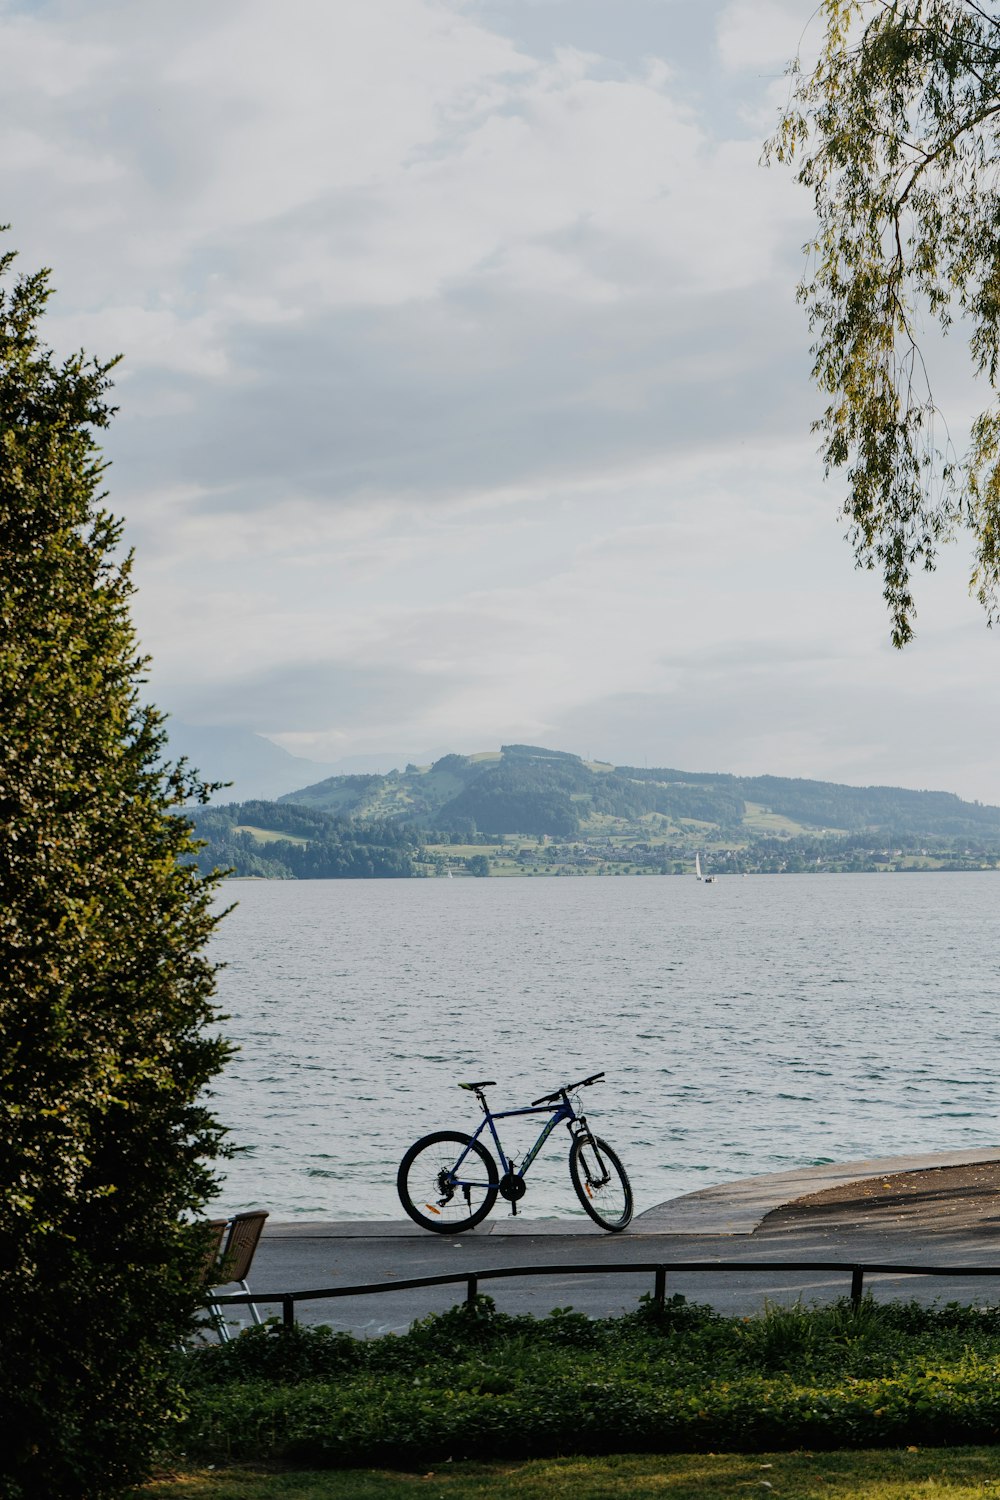 a bike is parked on a bench near the water